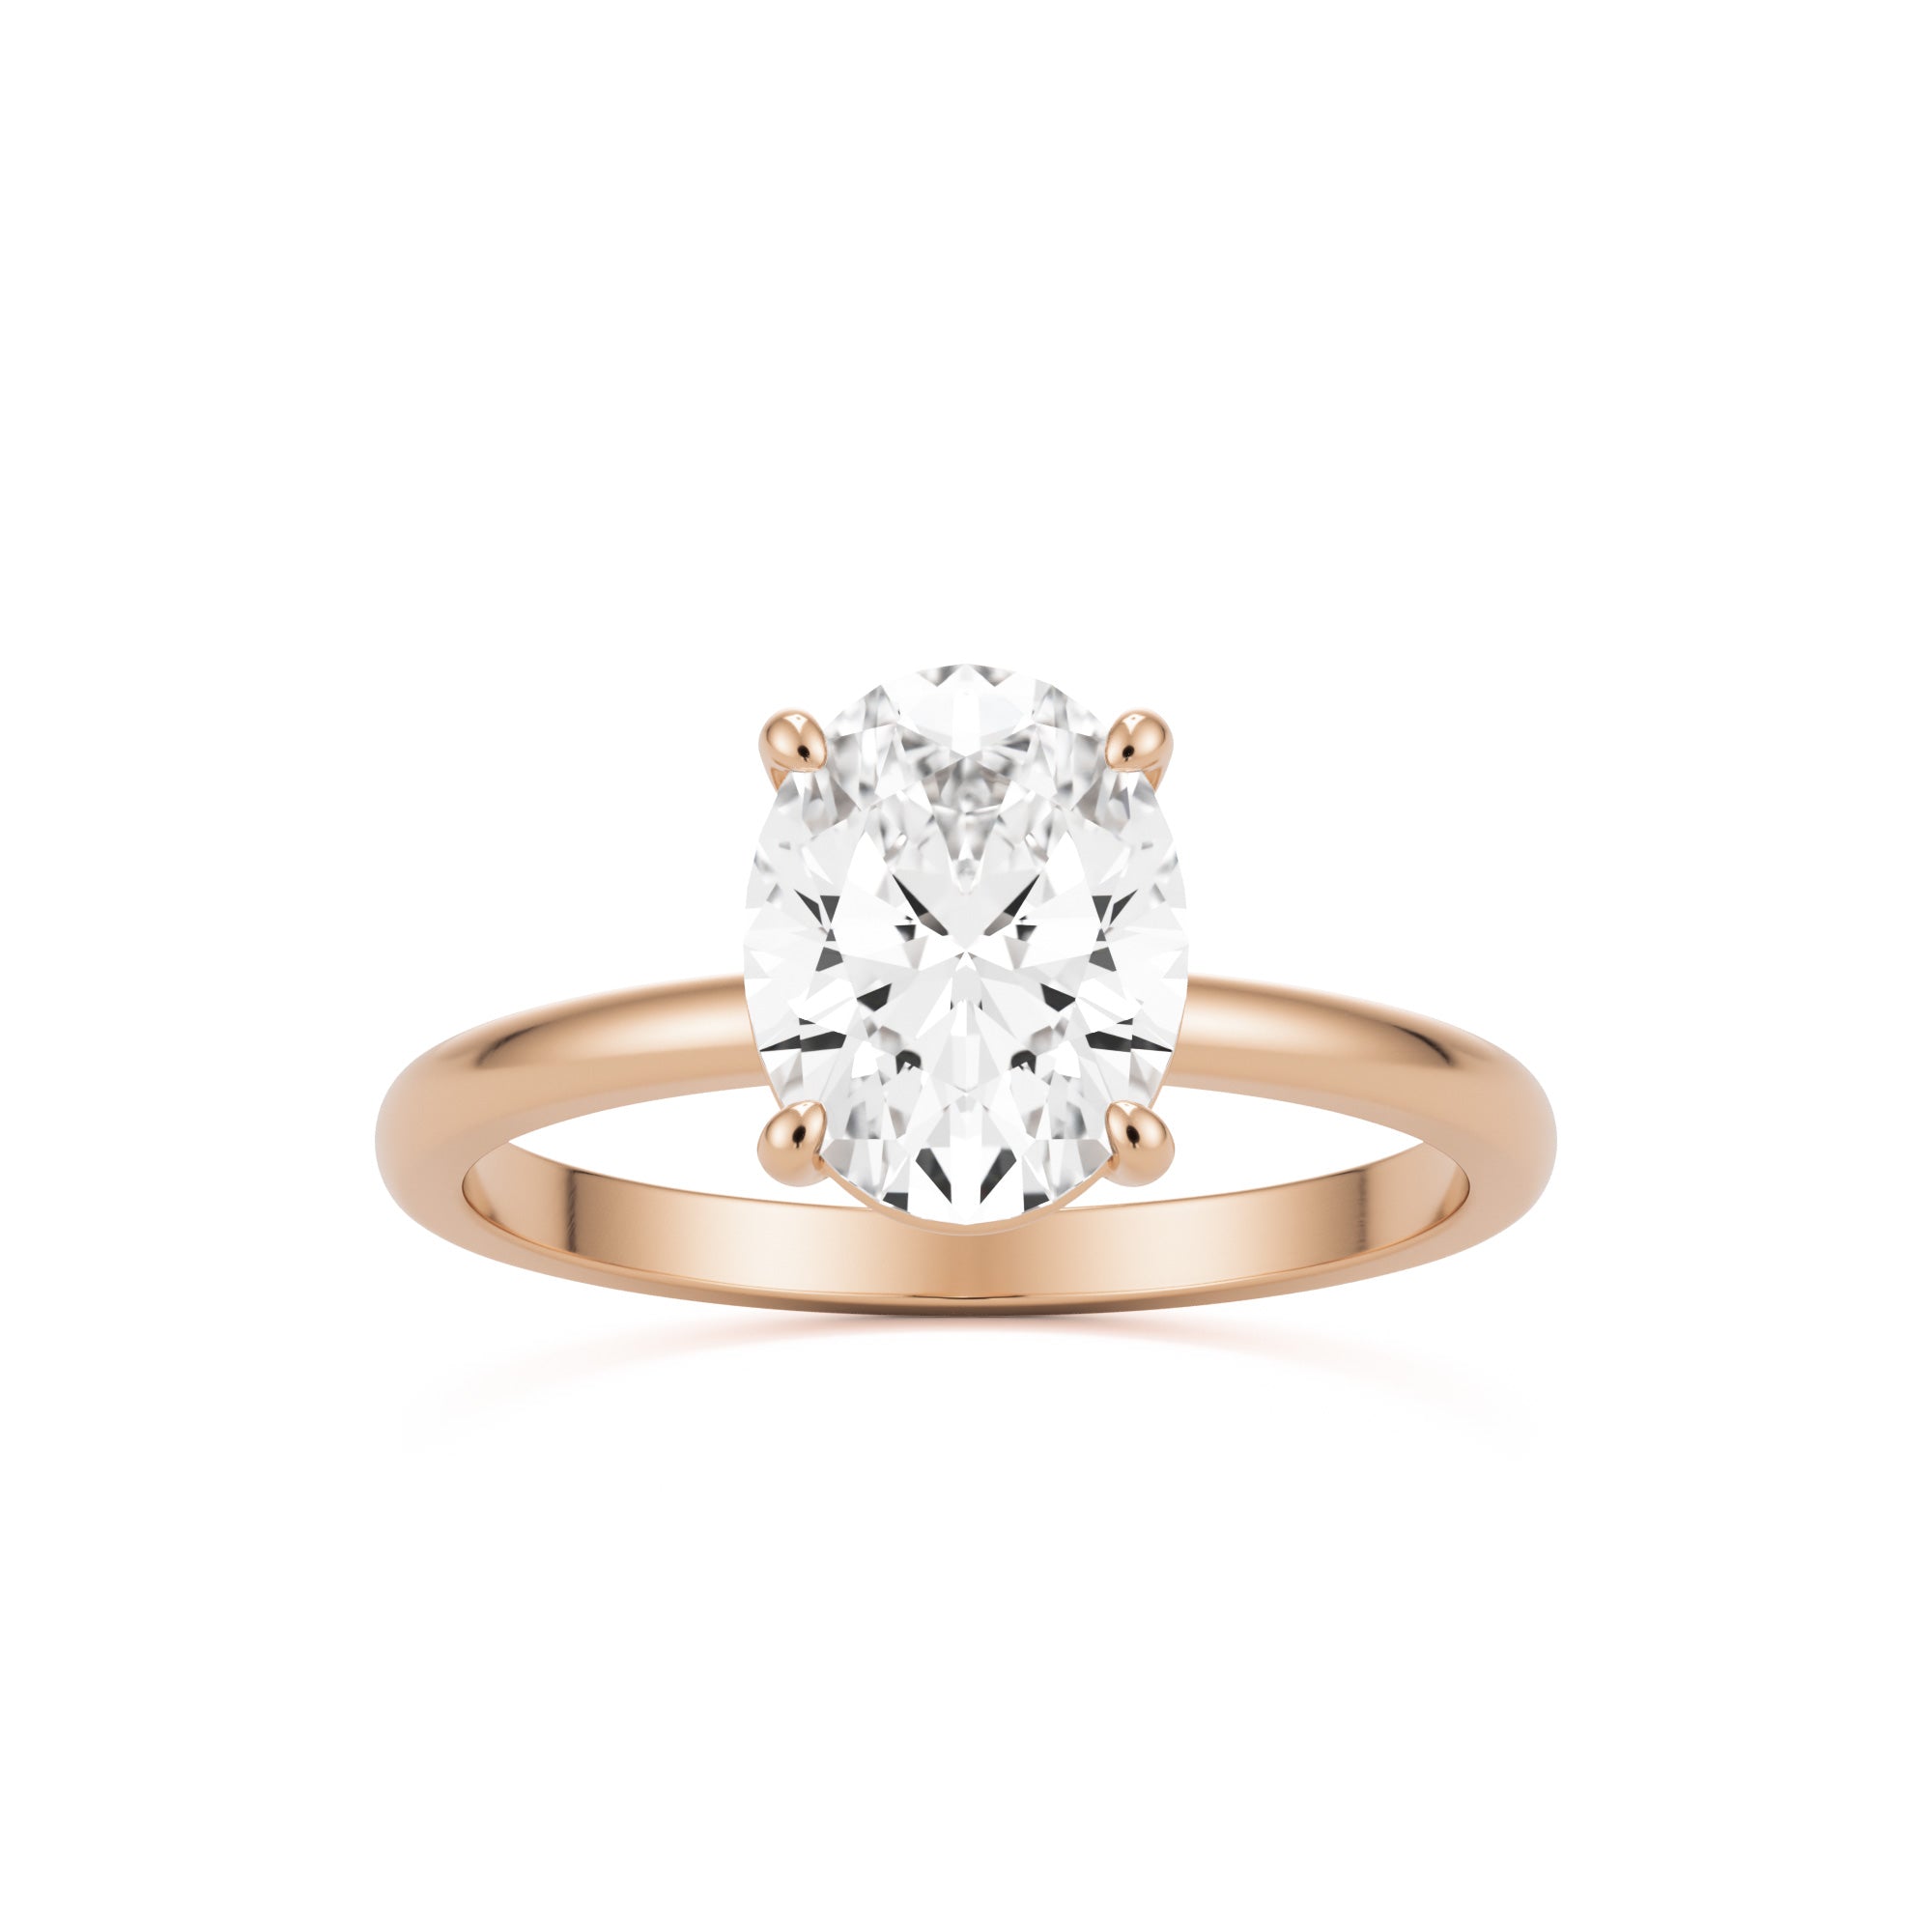 Which wedding band would pair well with solitaire elongated